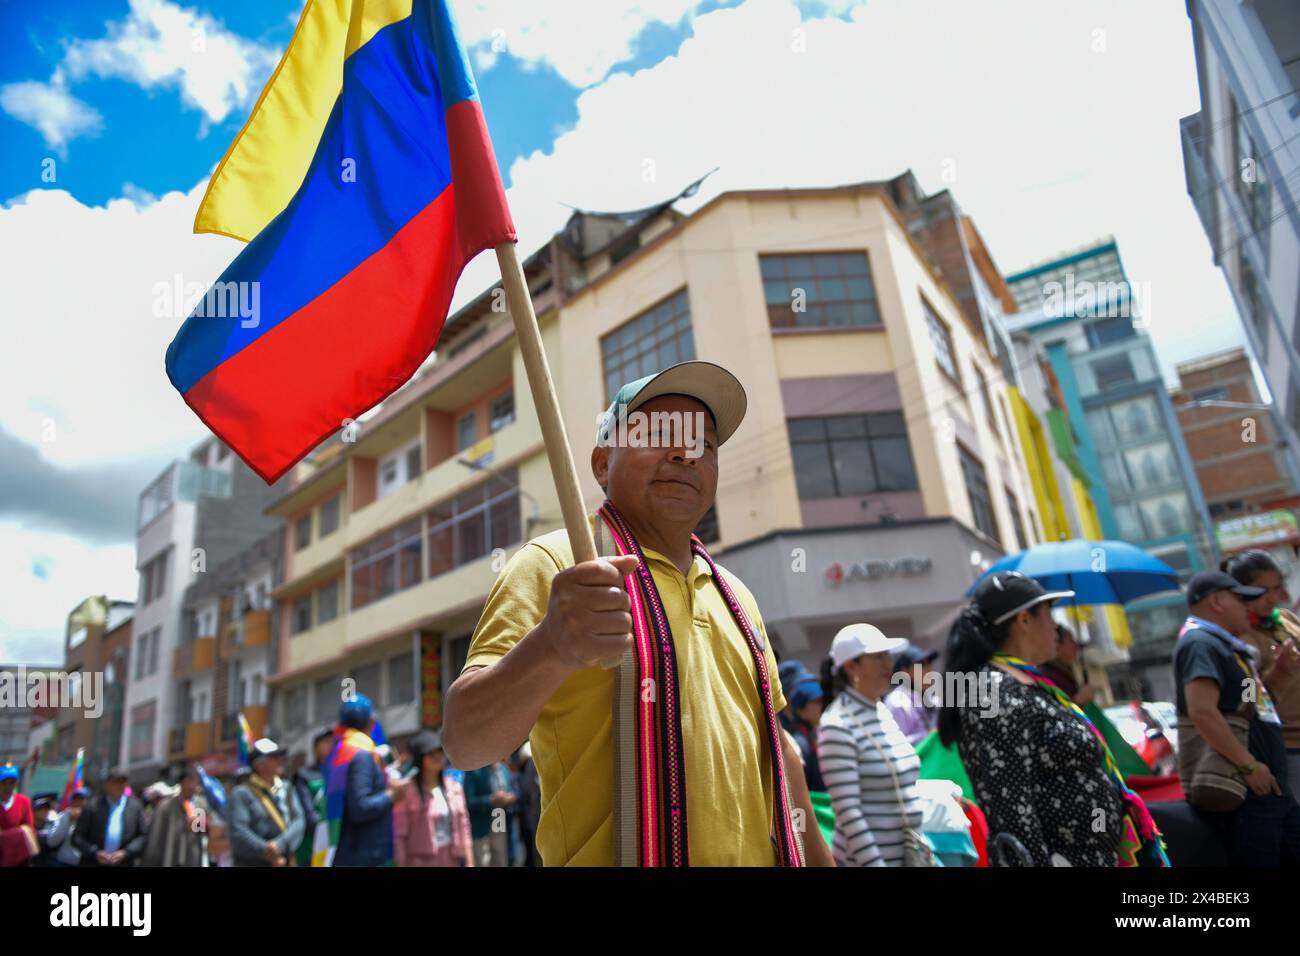 Ipiales, Colombia. 01st May, 2024. Supporters of colombian president Gustavo Petro demonstrate in support of his reform bills on retirment, labor, prisions and health on May 1, 2024, in Ipiales, Colombia. Photo by: Camilo Erasso/Long Visual Press Credit: Long Visual Press/Alamy Live News Stock Photo